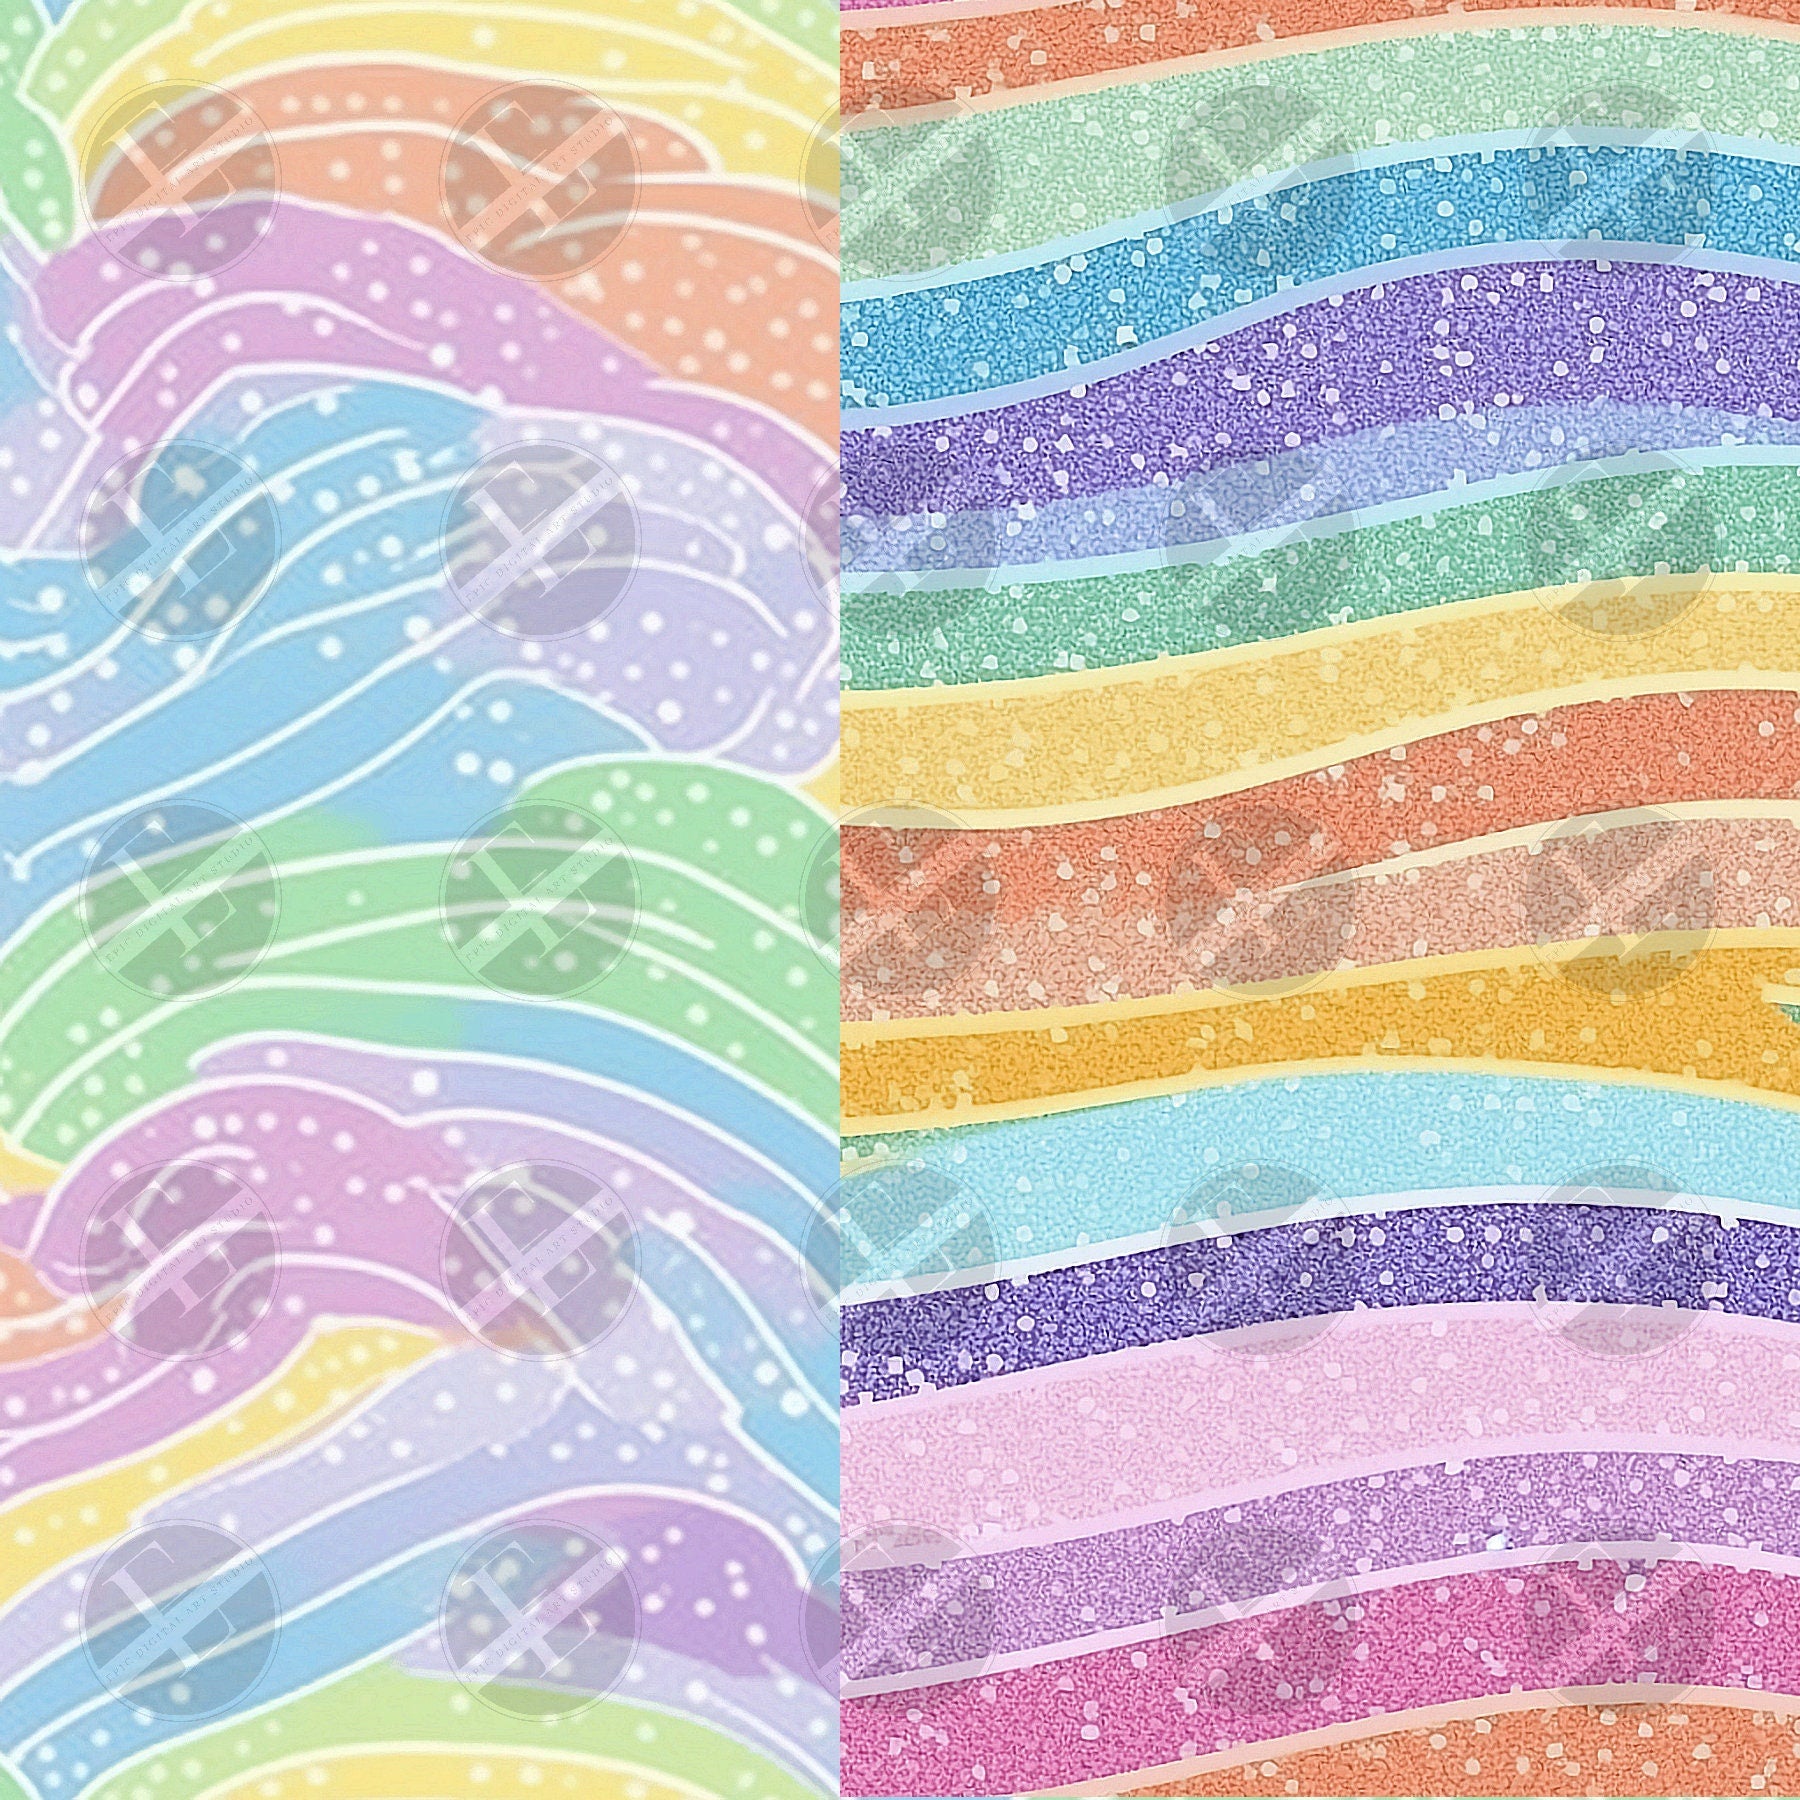 Boho Rainbow Swirl Seamless Patterns Digital Download PNG - Bundle of 18 - Pastel Dotted Watercolor Patterns - Commercial & Personal Use